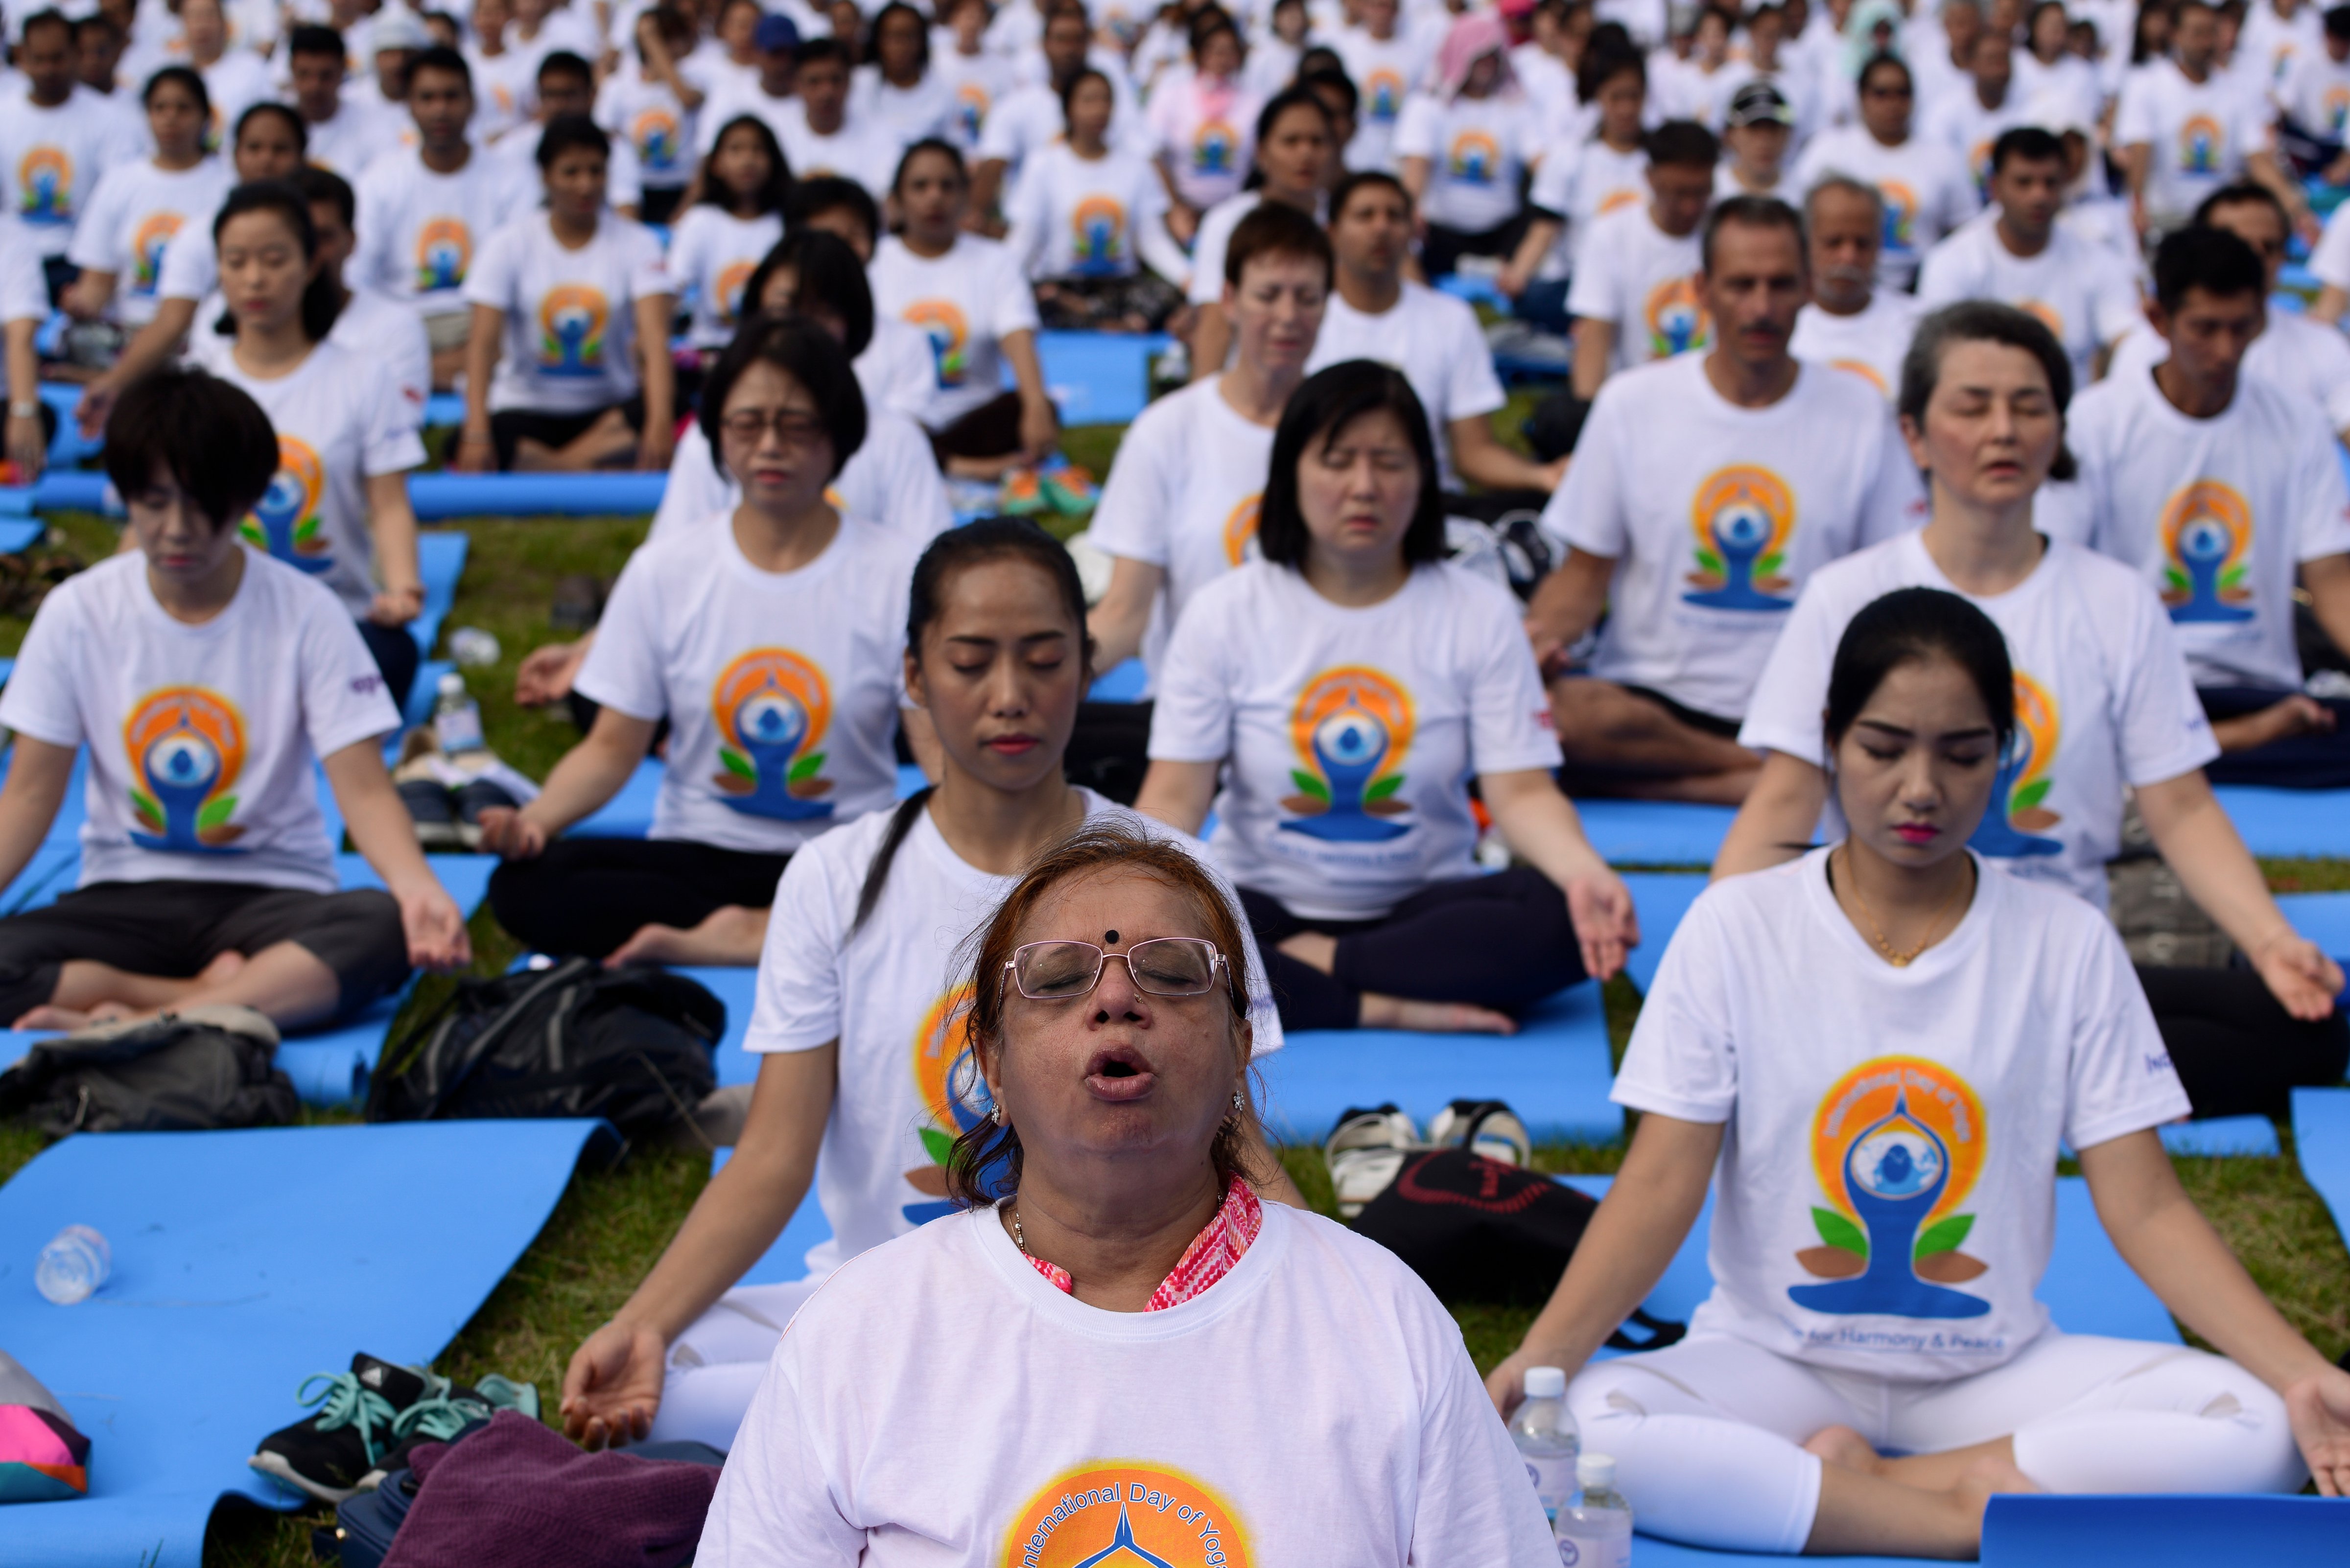 In the run up to the International Day of Yoga on June 21, thousands of people participate in a yoga exercise at Chulalongkorn University field in Bangkok, Thailand on June 17, 2018. (Anusak Laowilas/NurPhoto via Getty Images)